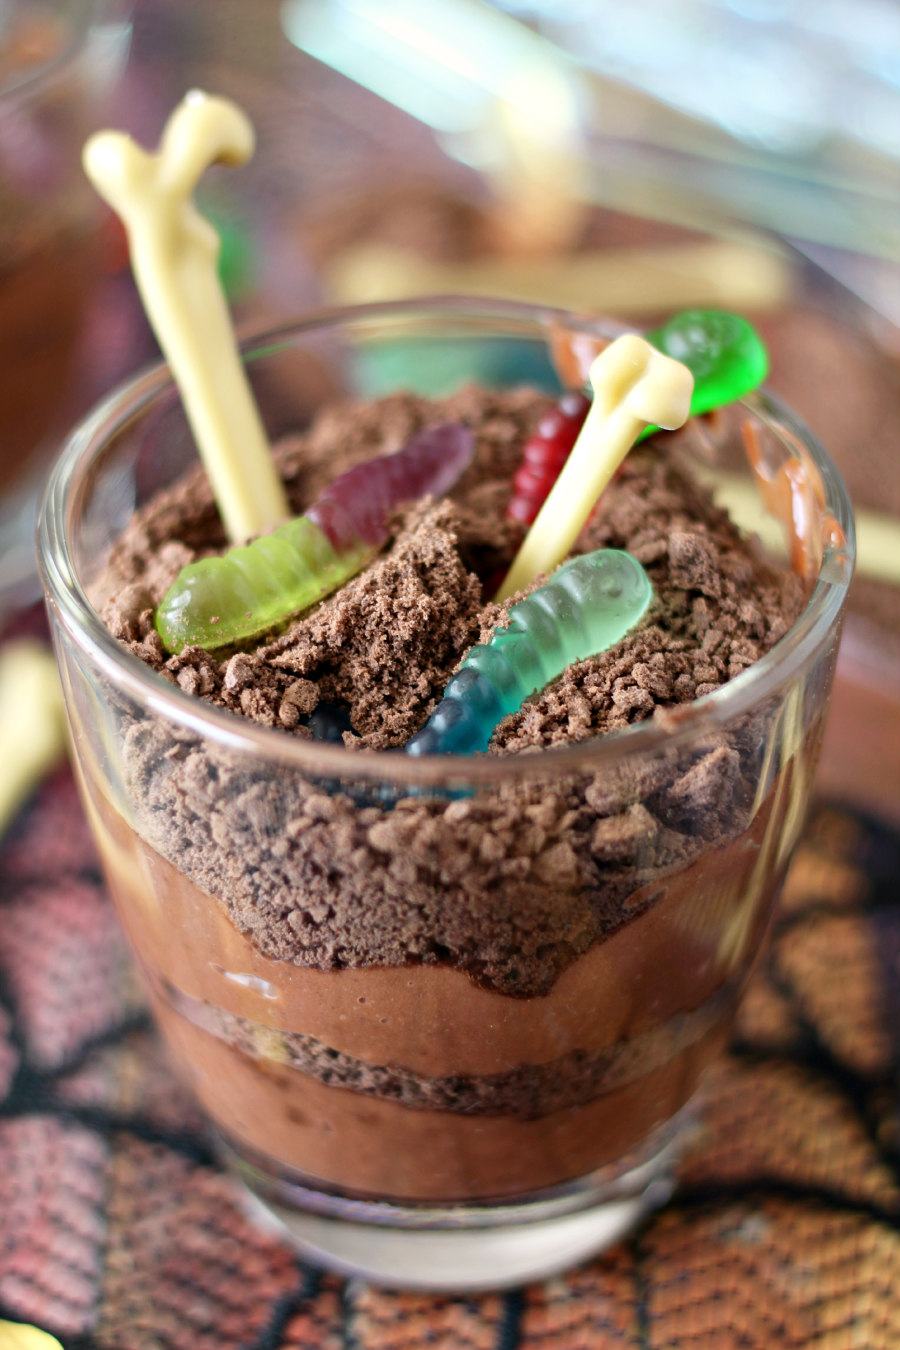 Glass of Dirt and Worm Chocolate Pudding topped with gummy worms and plastic bones.